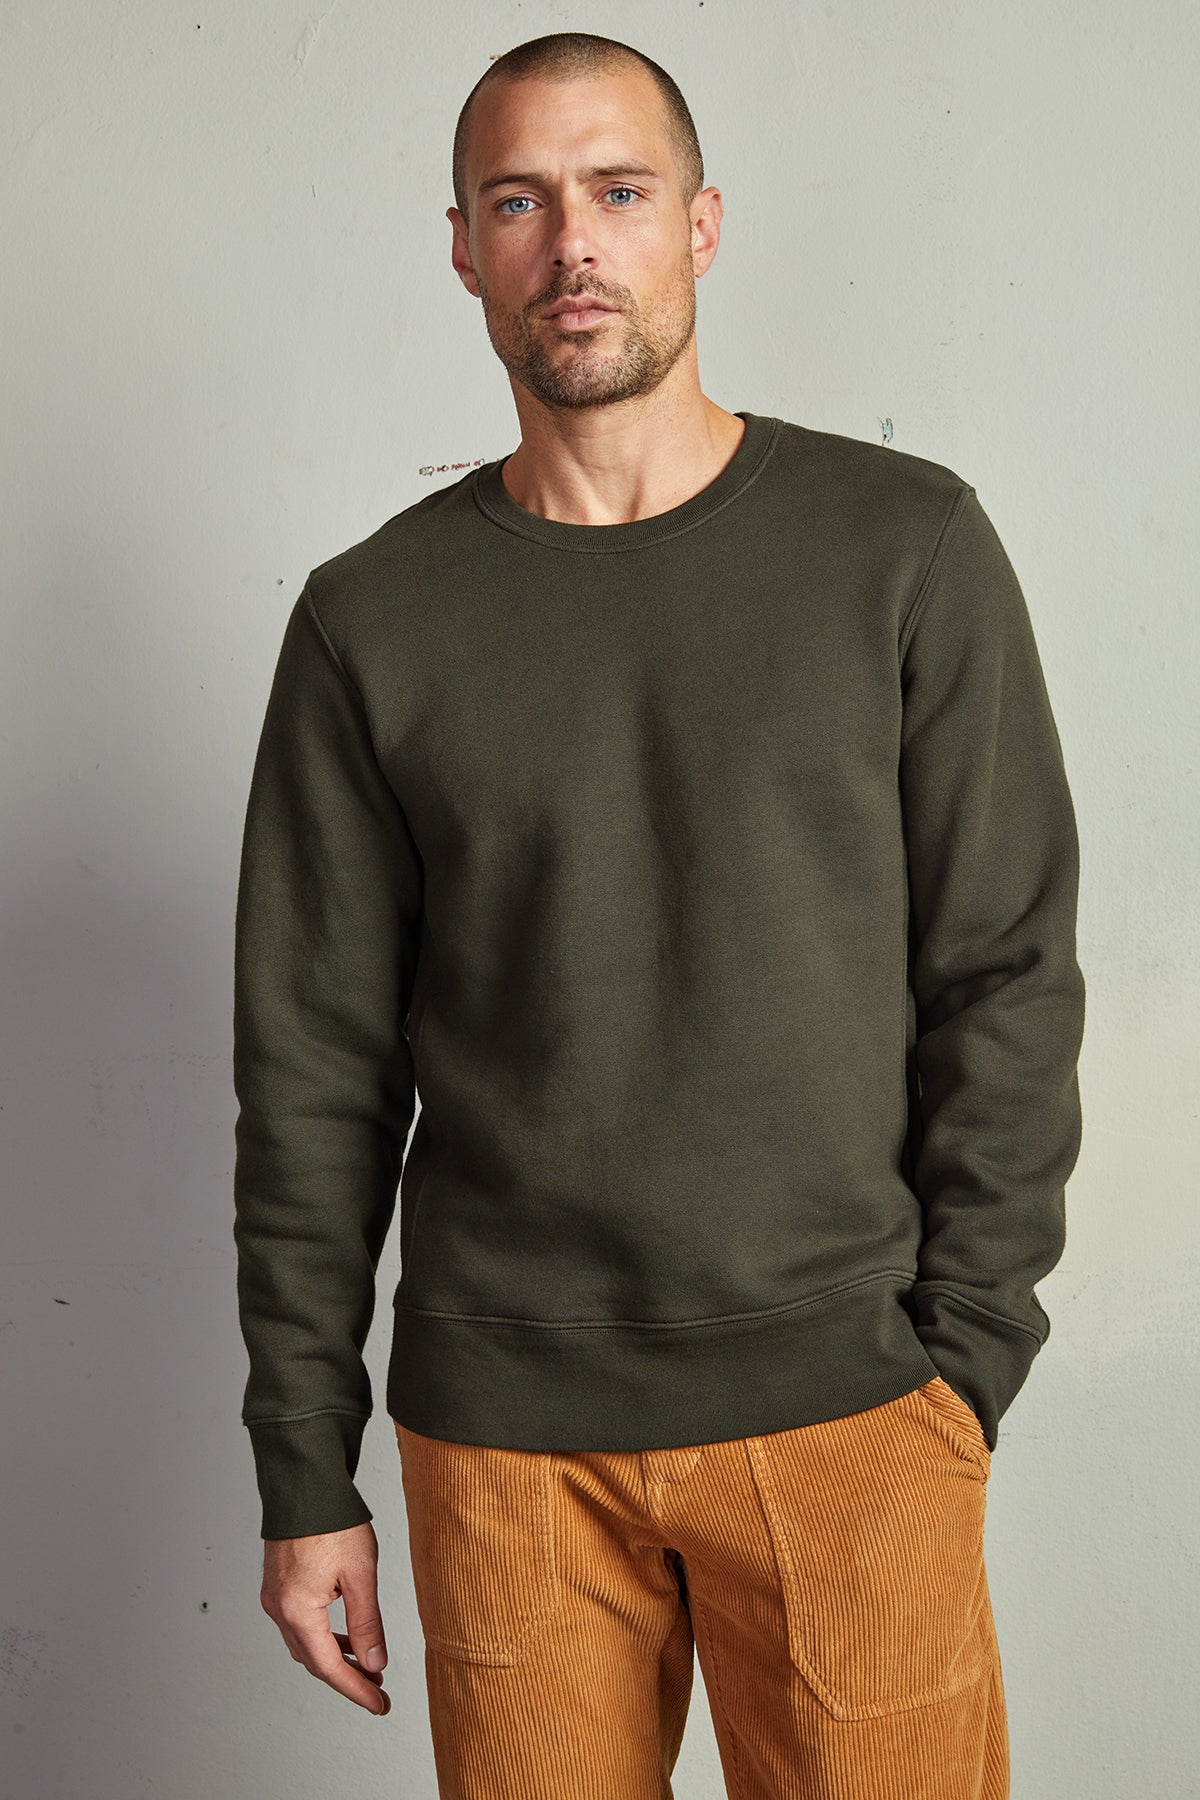 A man wearing a Velvet by Graham & Spencer KING CREW NECK SWEATSHIRT and brown pants with clean lines.-14904712724673